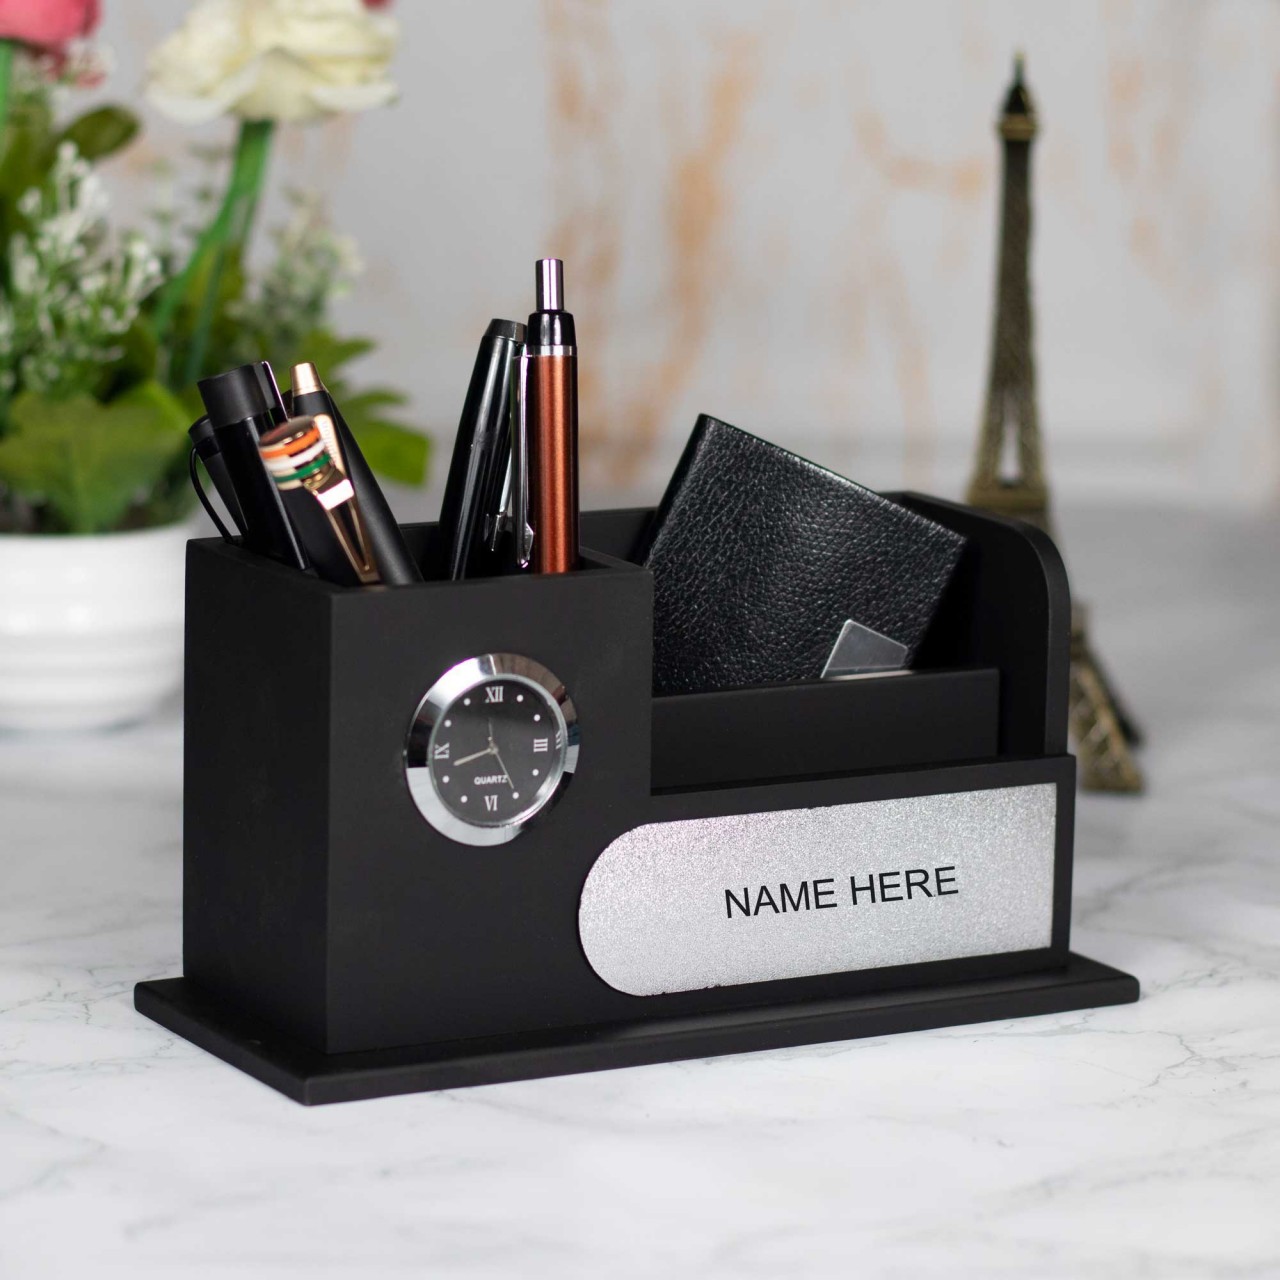 Table stand with watch and card holder